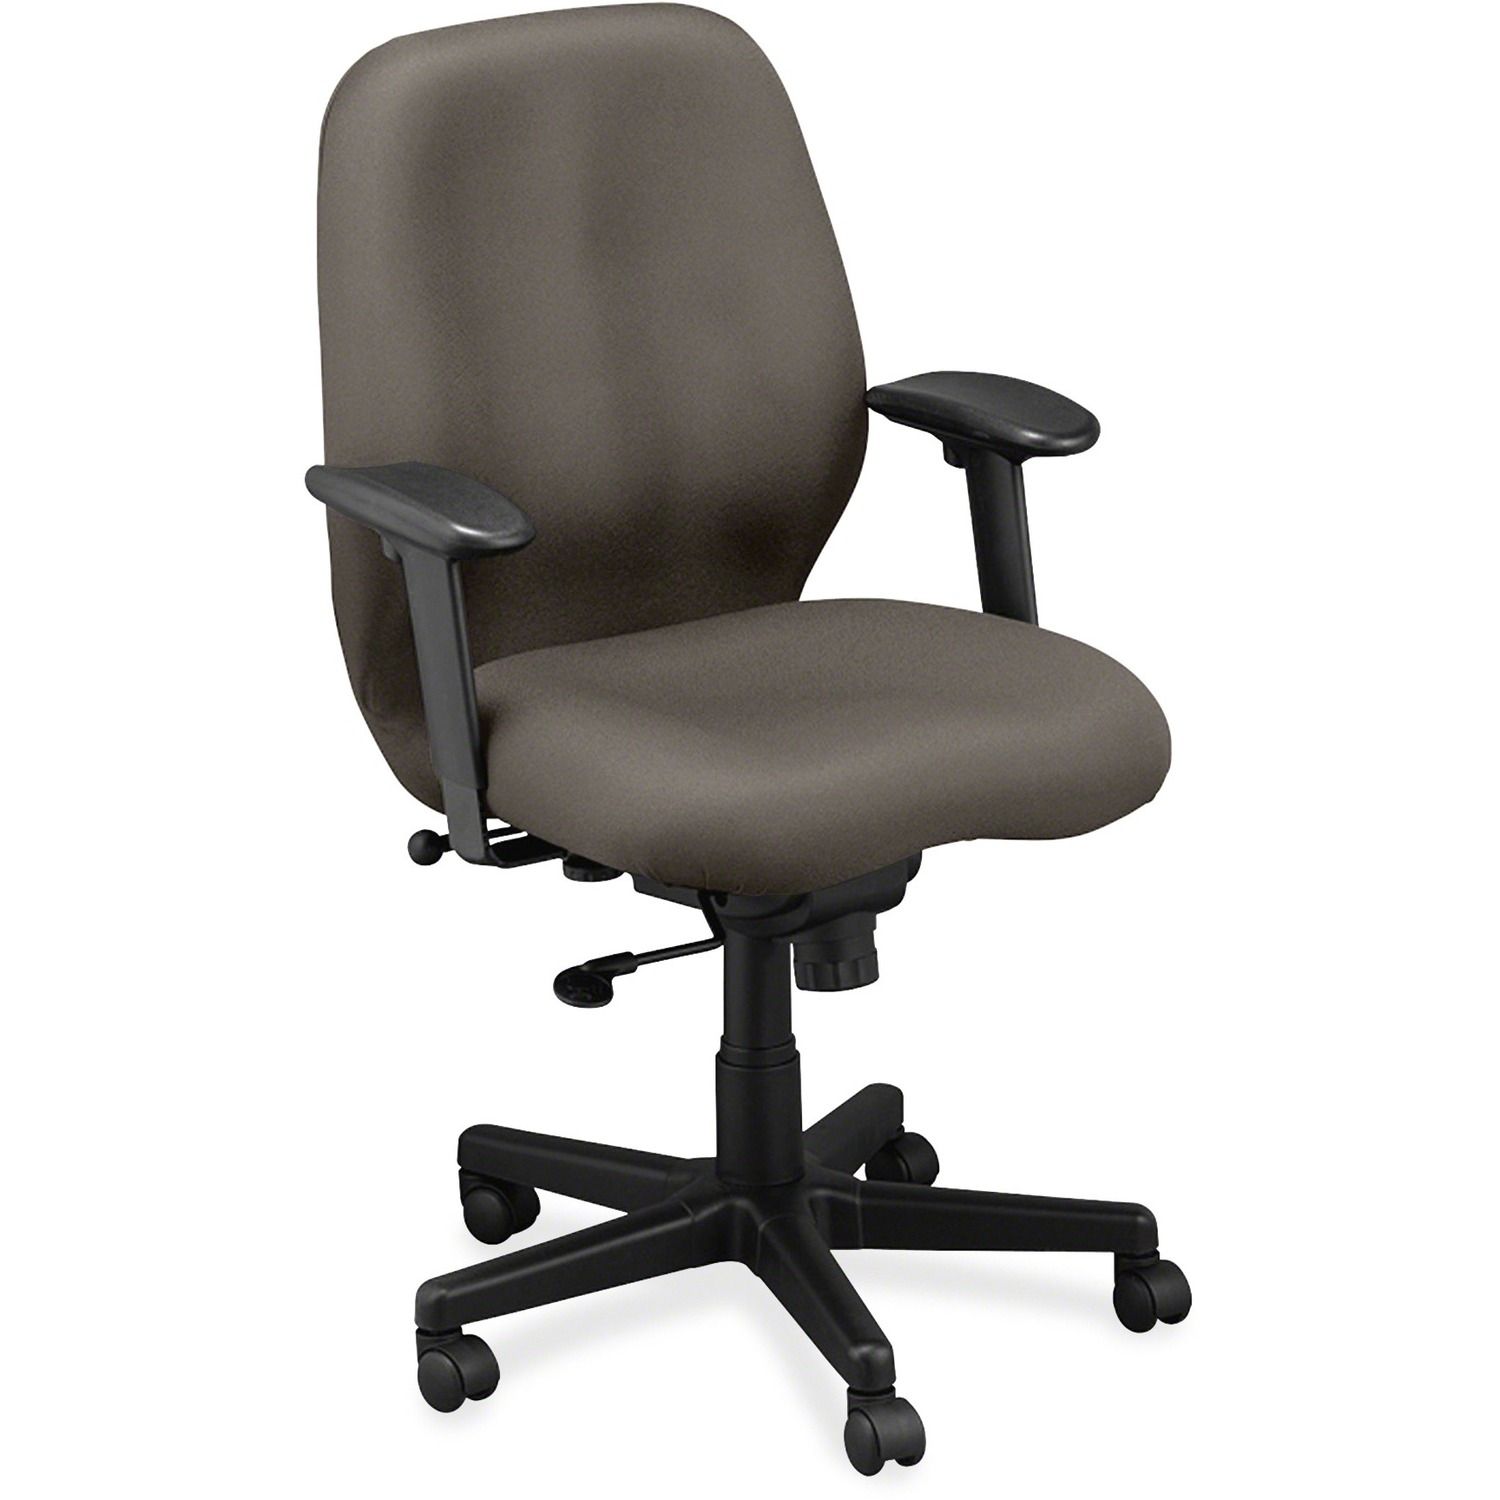 Aviator FM5505 Task Chair Carbon Fabric Seat, Carbon Fabric Back, 5-star Base, 1 Each